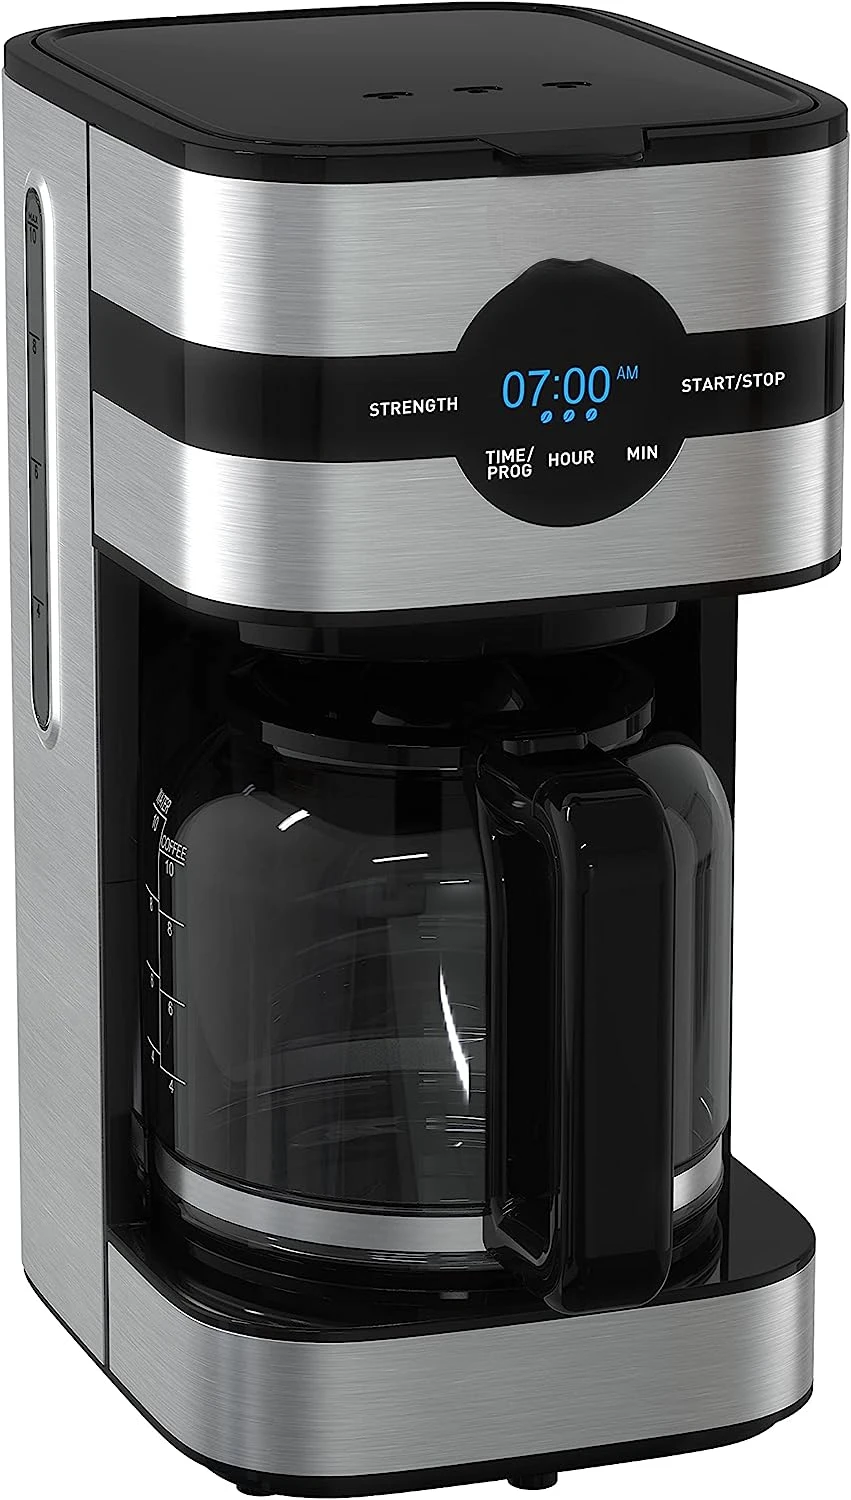 

Simply Brew Stainless Steel Drip Maker 10 Cup 900 Watts Digital Control, Filter, Drip Free, Dishwasher Safe Pot Silver and Bla